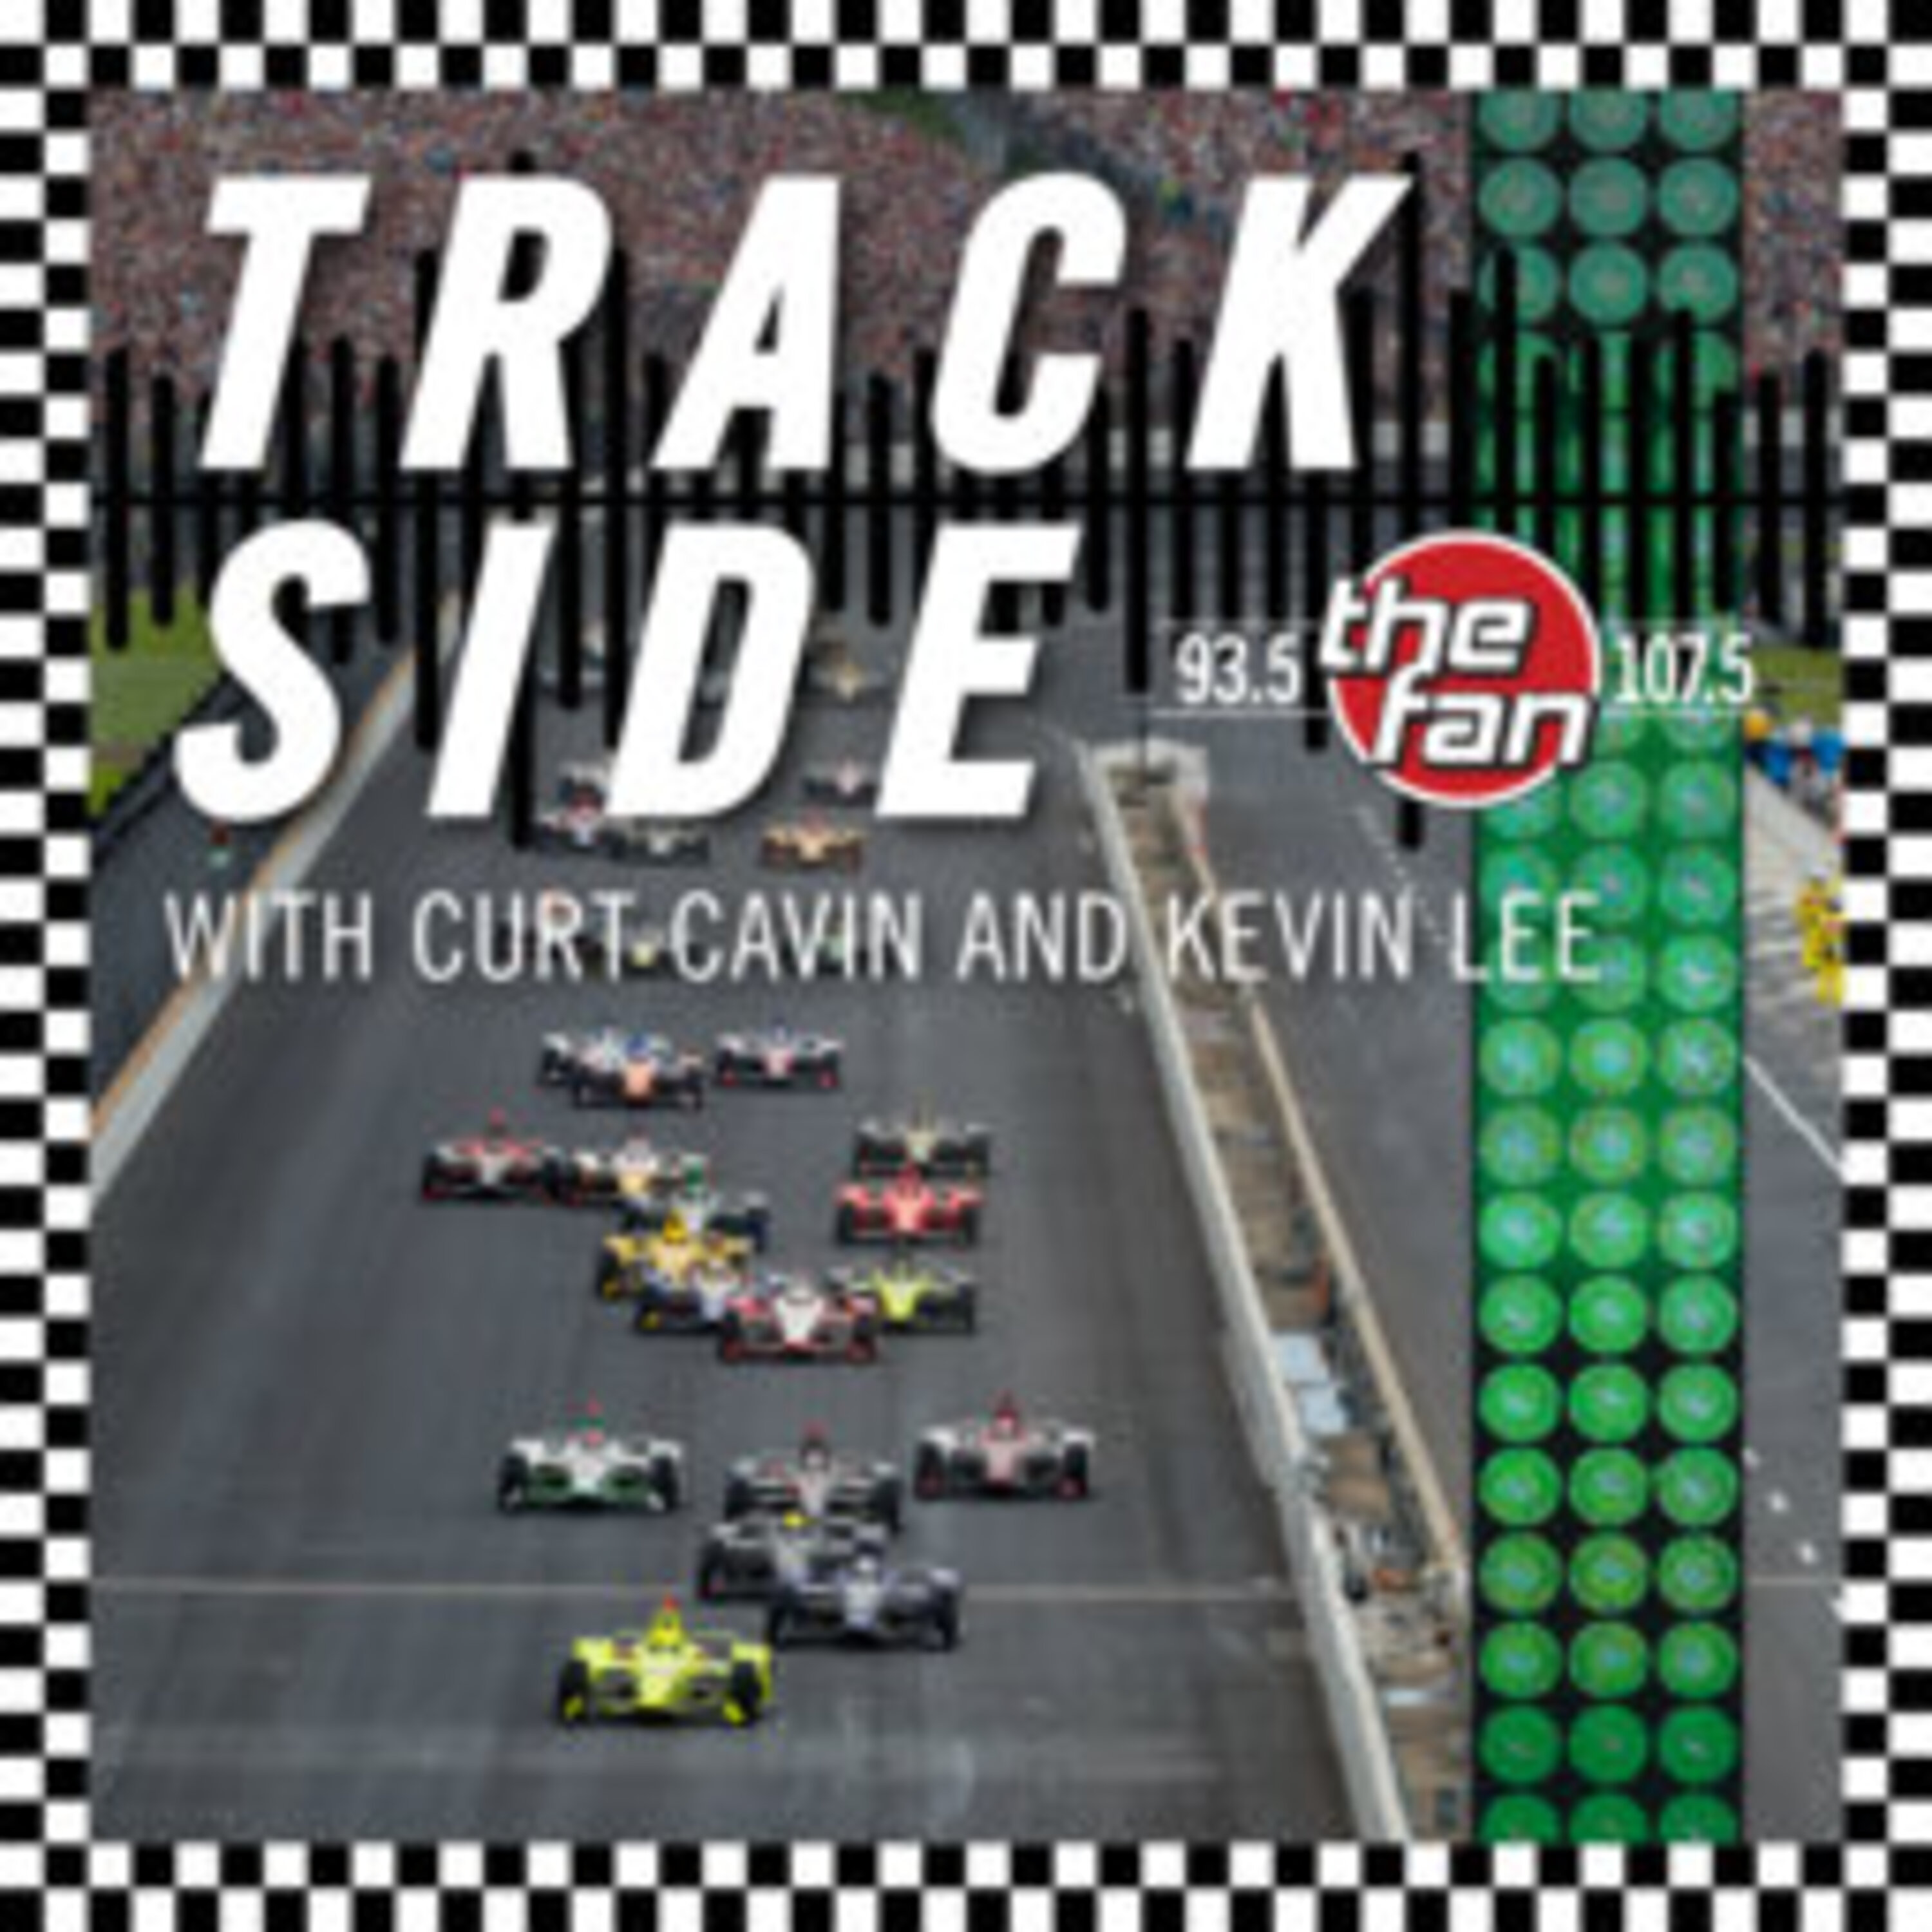 Curt and Kevin talk the Indy 500 forecast, who can realistically win on Sunday